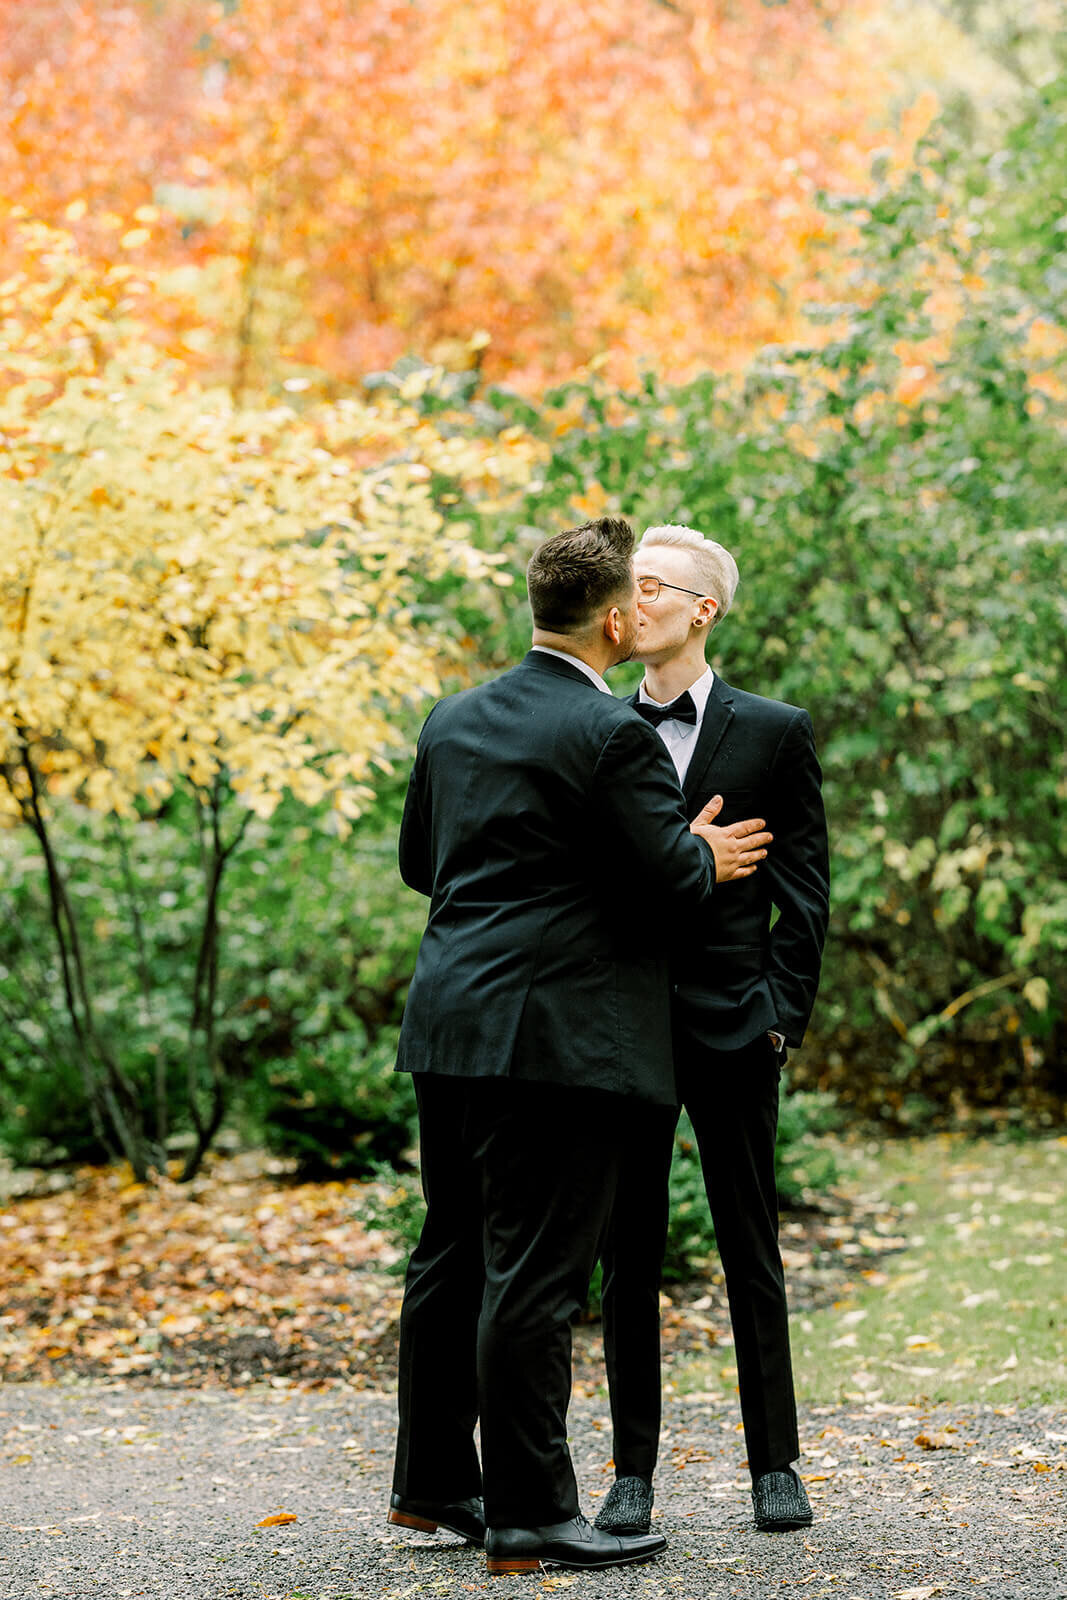 Greencrest Manor wedding in fall colors